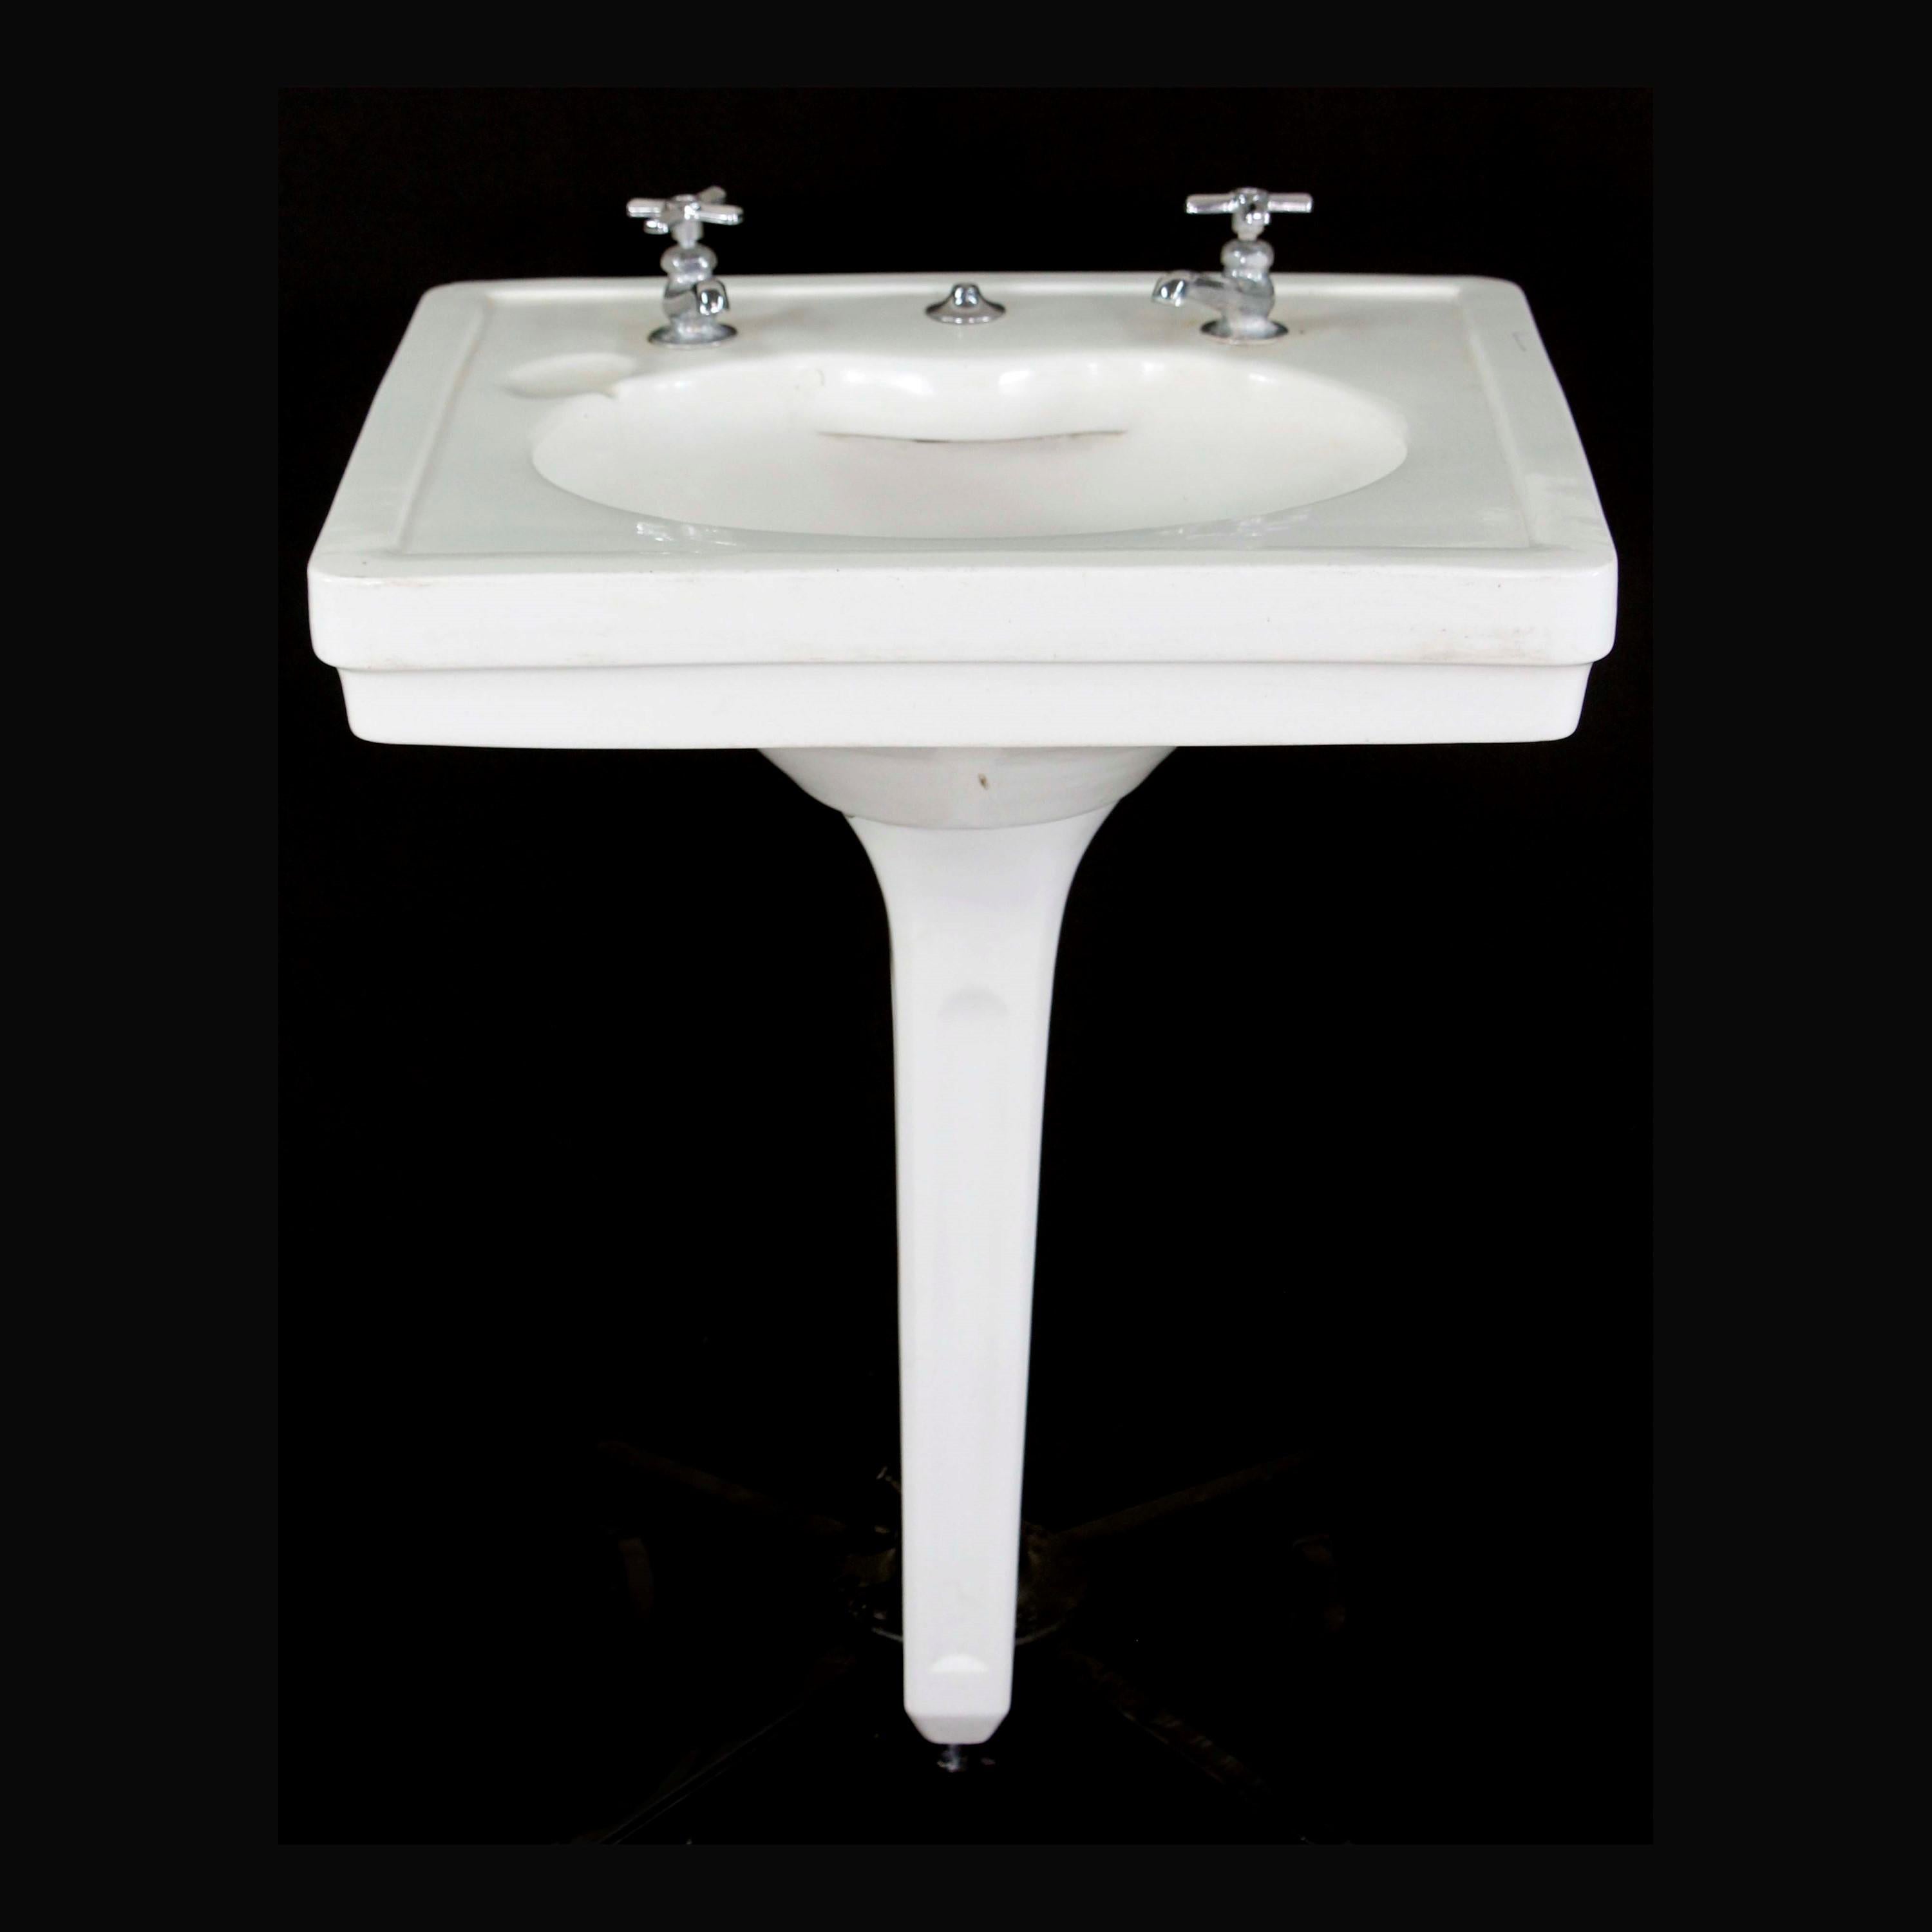 Antique white durock ceramic pedestal sink made by Thomas Maddock's Sons Co., Trenton, New Jersey.   It is stamped 